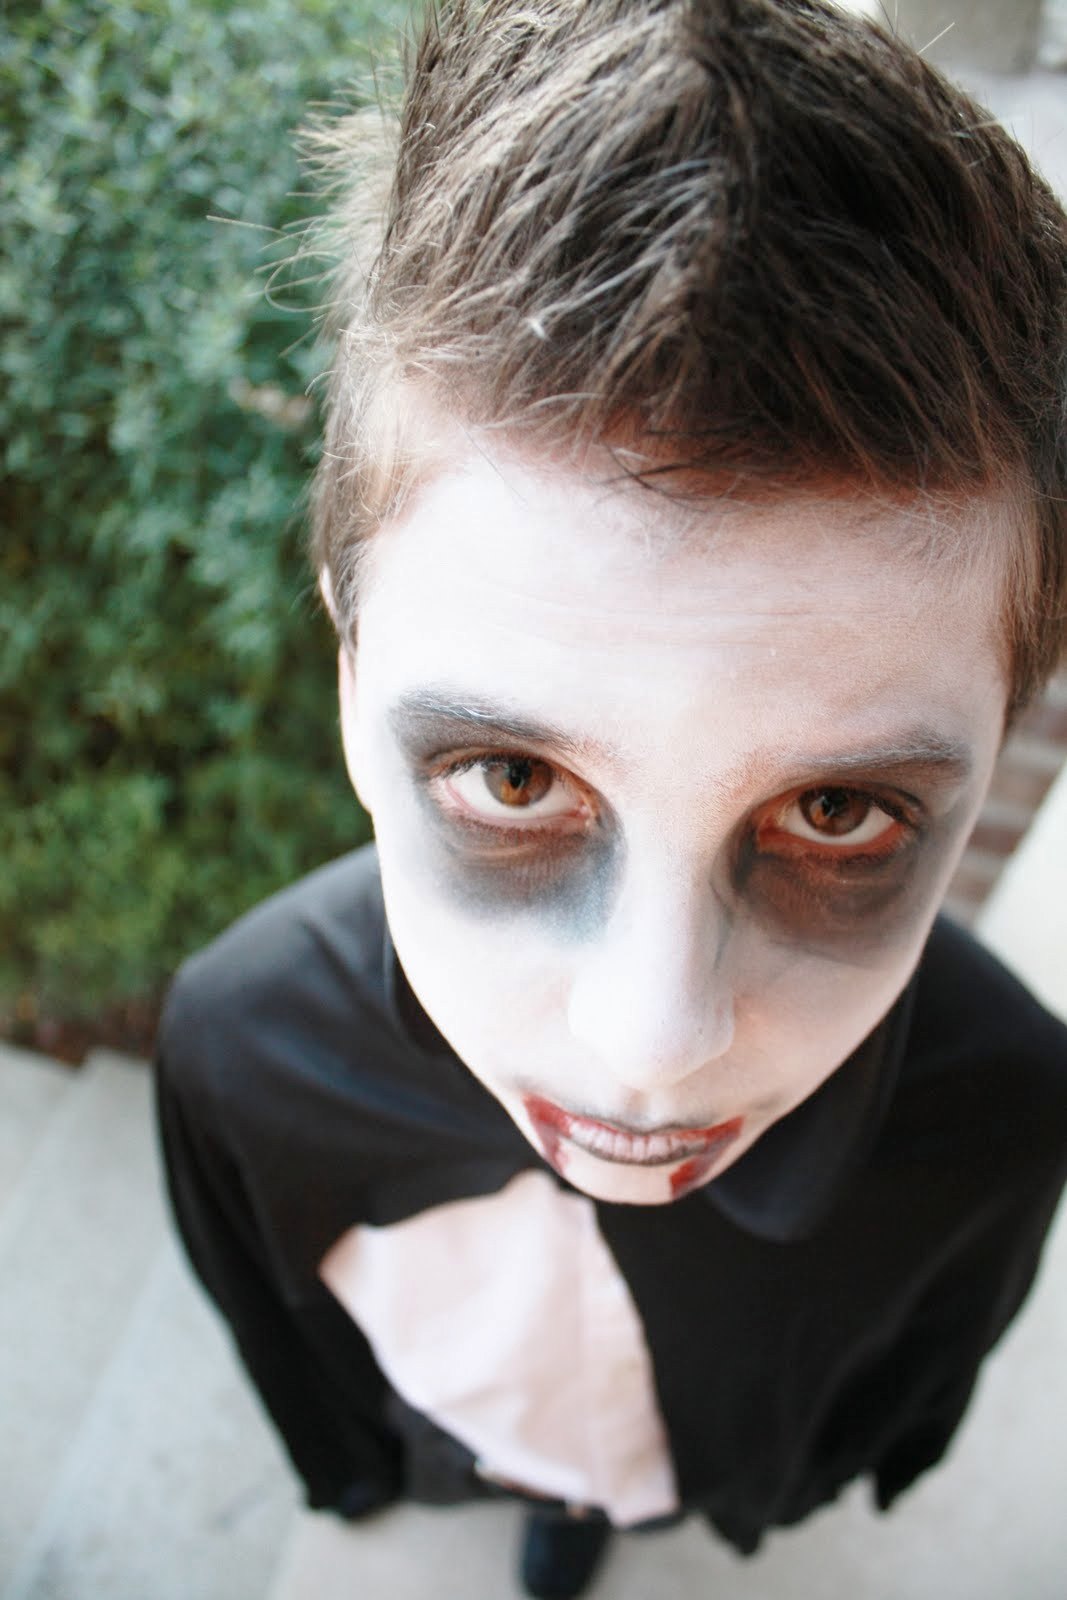 25 Amazing Boys Halloween Makeup Ideas to Try - Flawssy